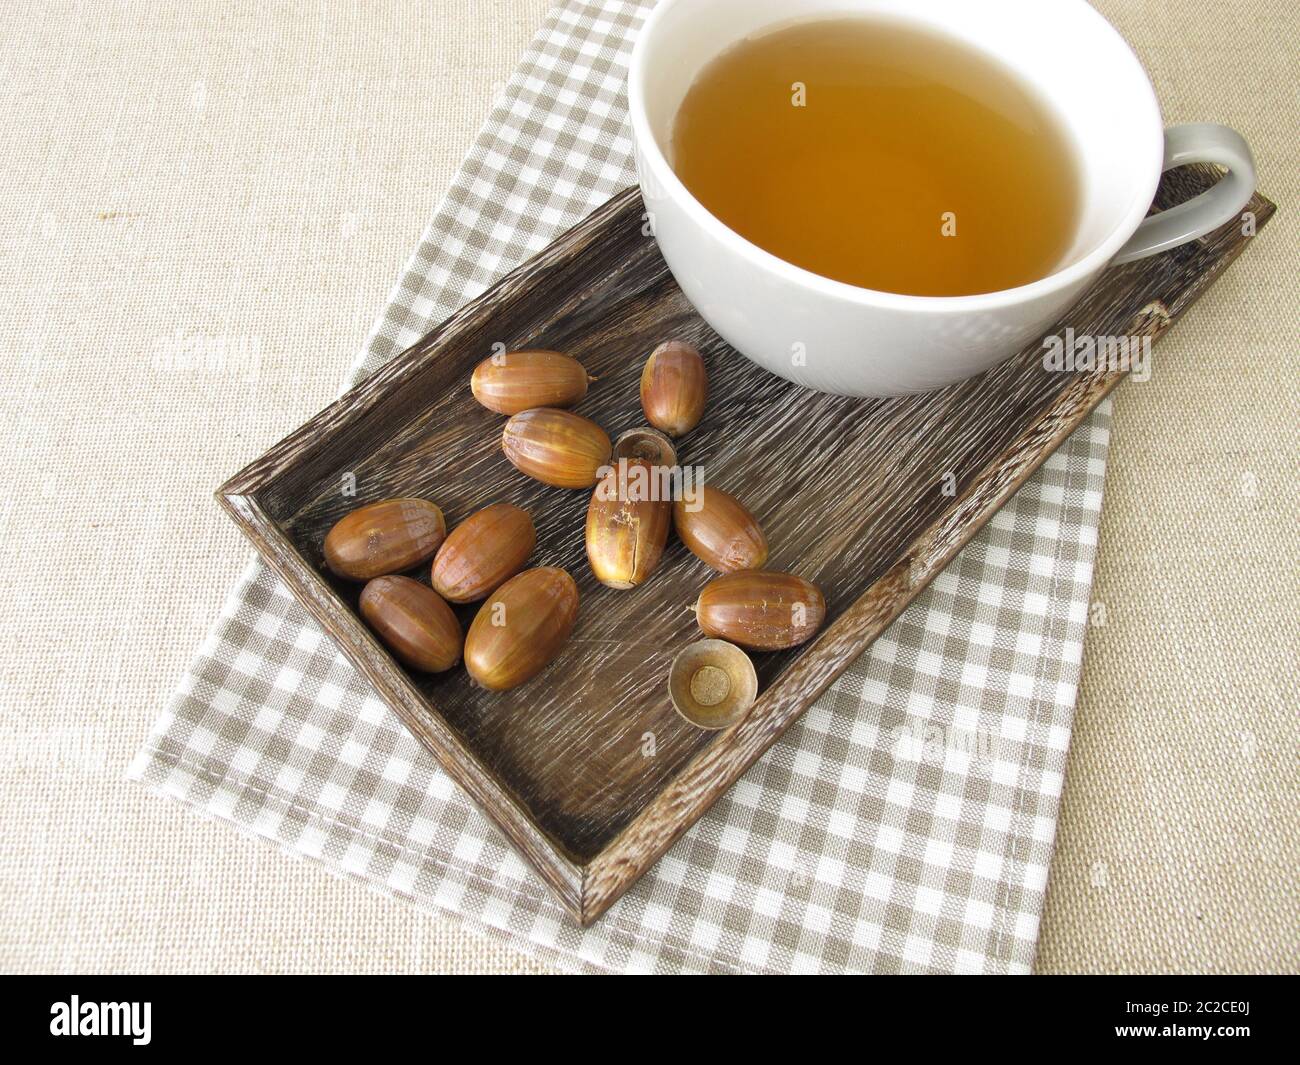 Acorn coffee from roasted acorns on a tray Stock Photo